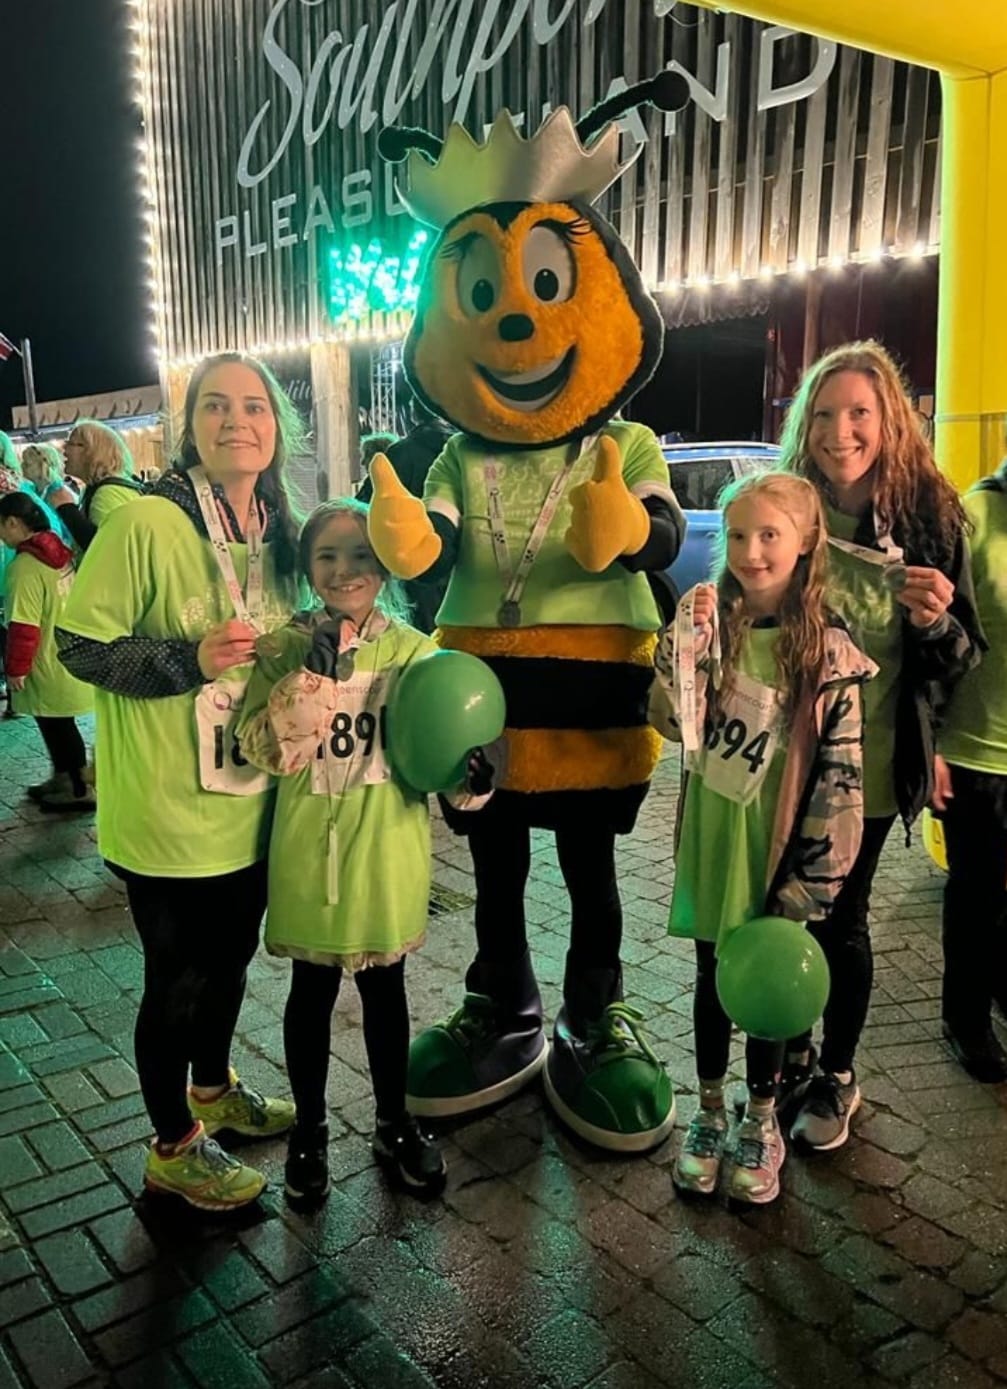 Nige Myers said: "My wife and daughter did the walk with her friend from work and her daughter. They loved it, although they were soaked to the bone when they got in. I am a very proud husband and dad. Well done to all that took part."